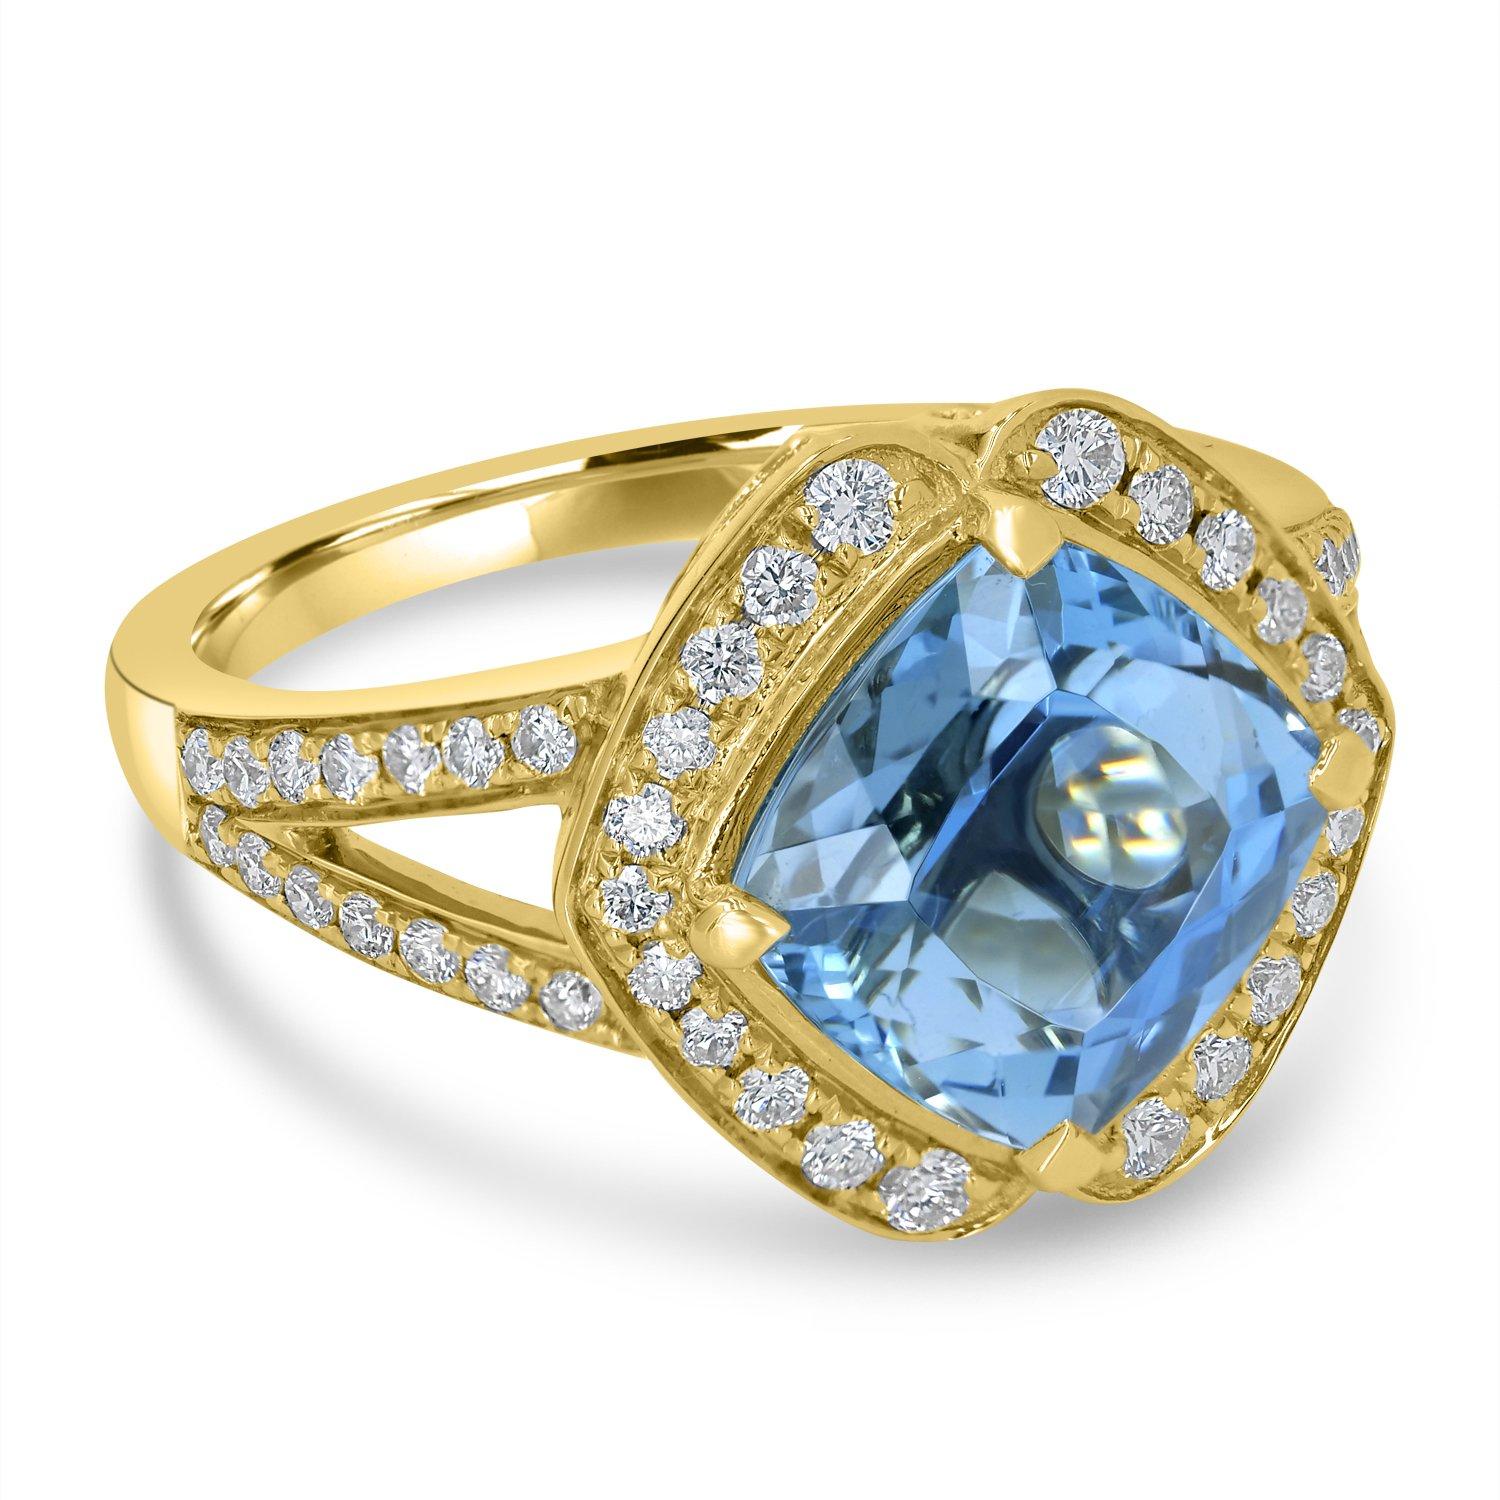 3.12ct Aquamarine Ring with 0.42Tct Diamonds Set in 14K Yellow Gold In New Condition For Sale In New York, NY